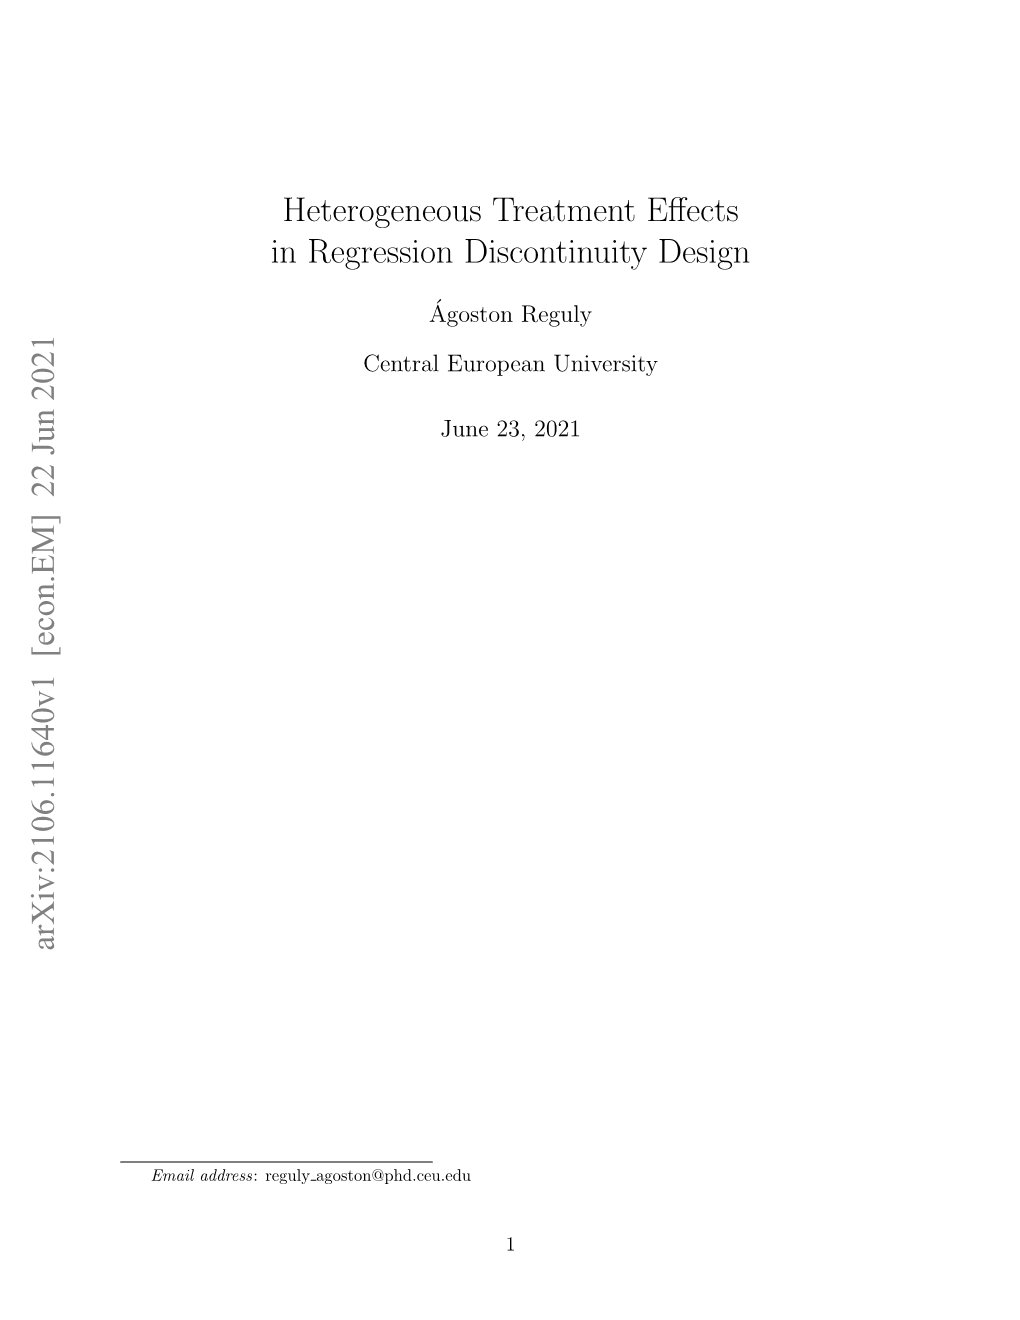 Heterogeneous Treatment Effects in Regression Discontinuity Design